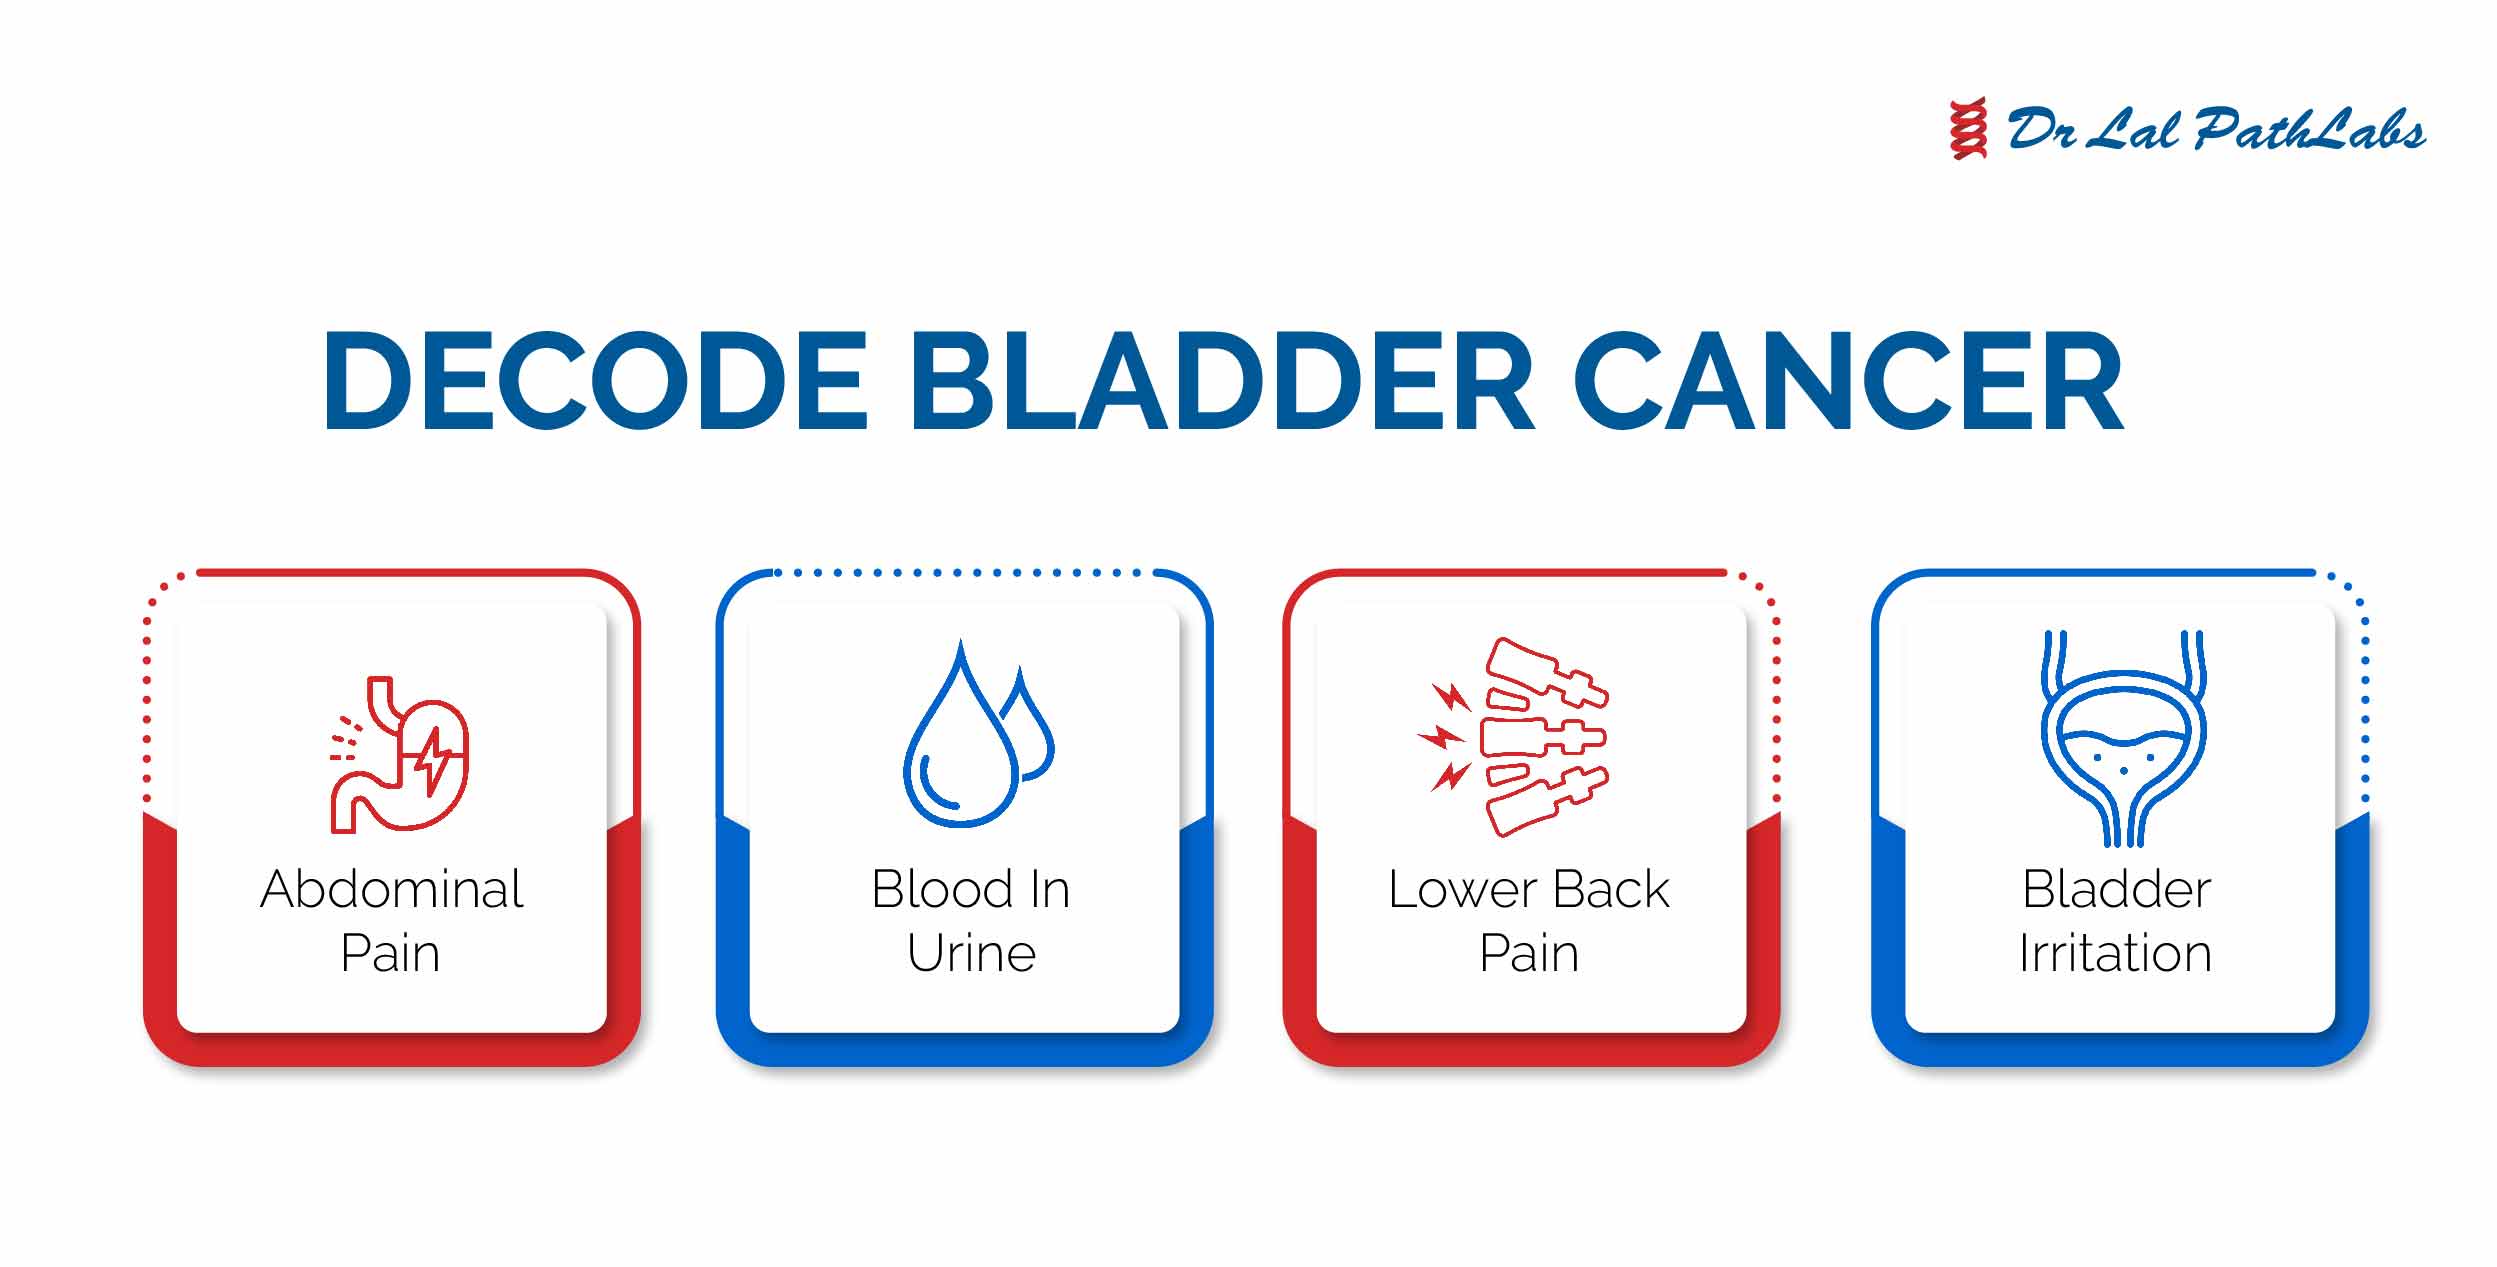 Bladder Cancer: Symptoms, Diagnosis and Prevention - Dr Lal PathLabs Blog